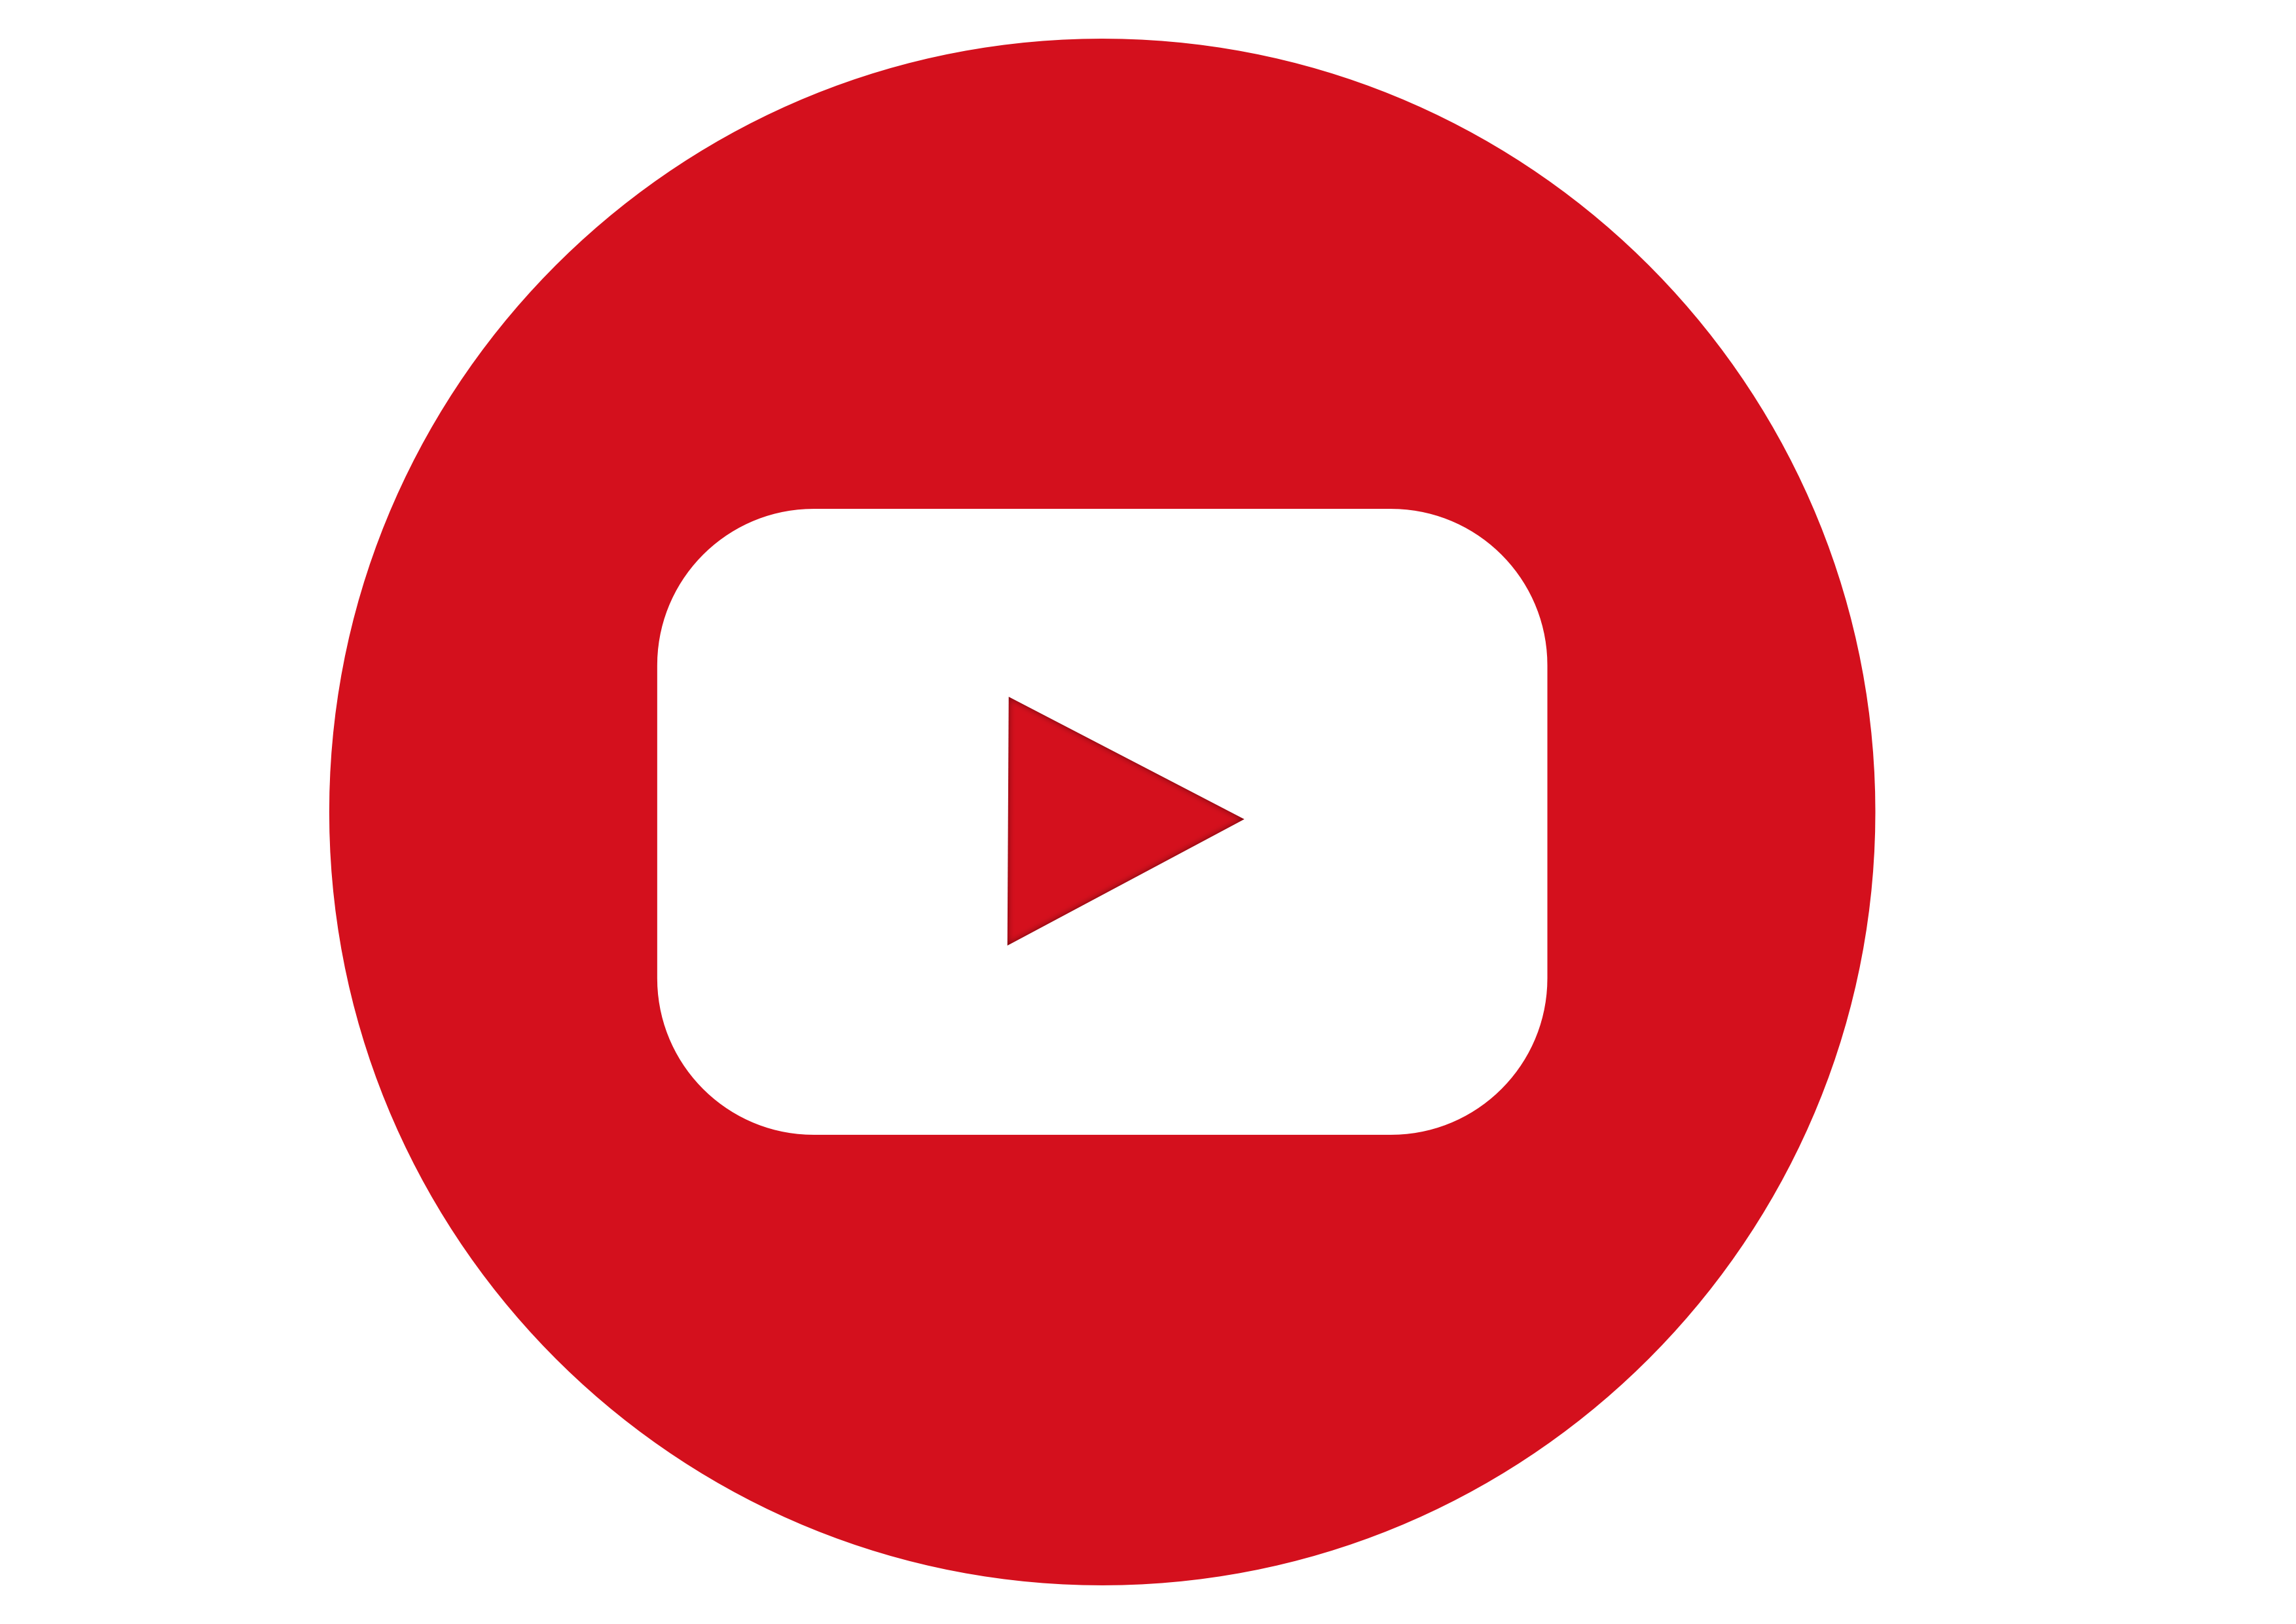 YT Logo - Youtube Logo Transparent PNG Pictures - Free Icons and PNG Backgrounds